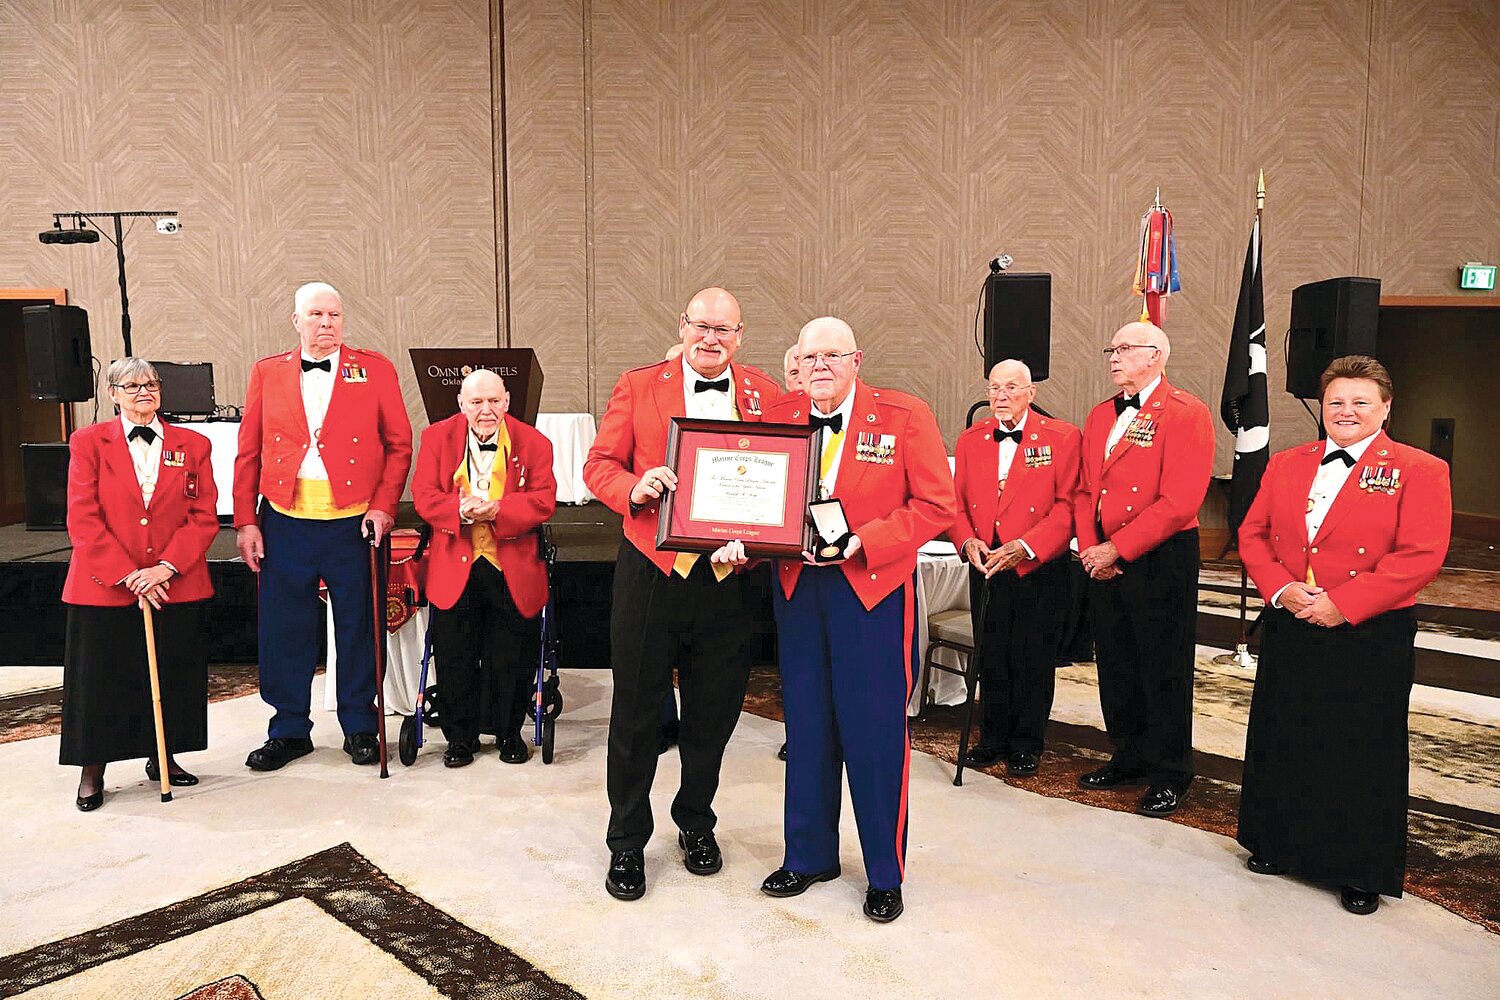 Jeffery Jones presents the Marine of the Year award to Wendell W. Webb, of Warrenton, during the Marine Corps League National Convention in Oklahoma City. They are flanked by previous recipients of the award.  Submitted photo